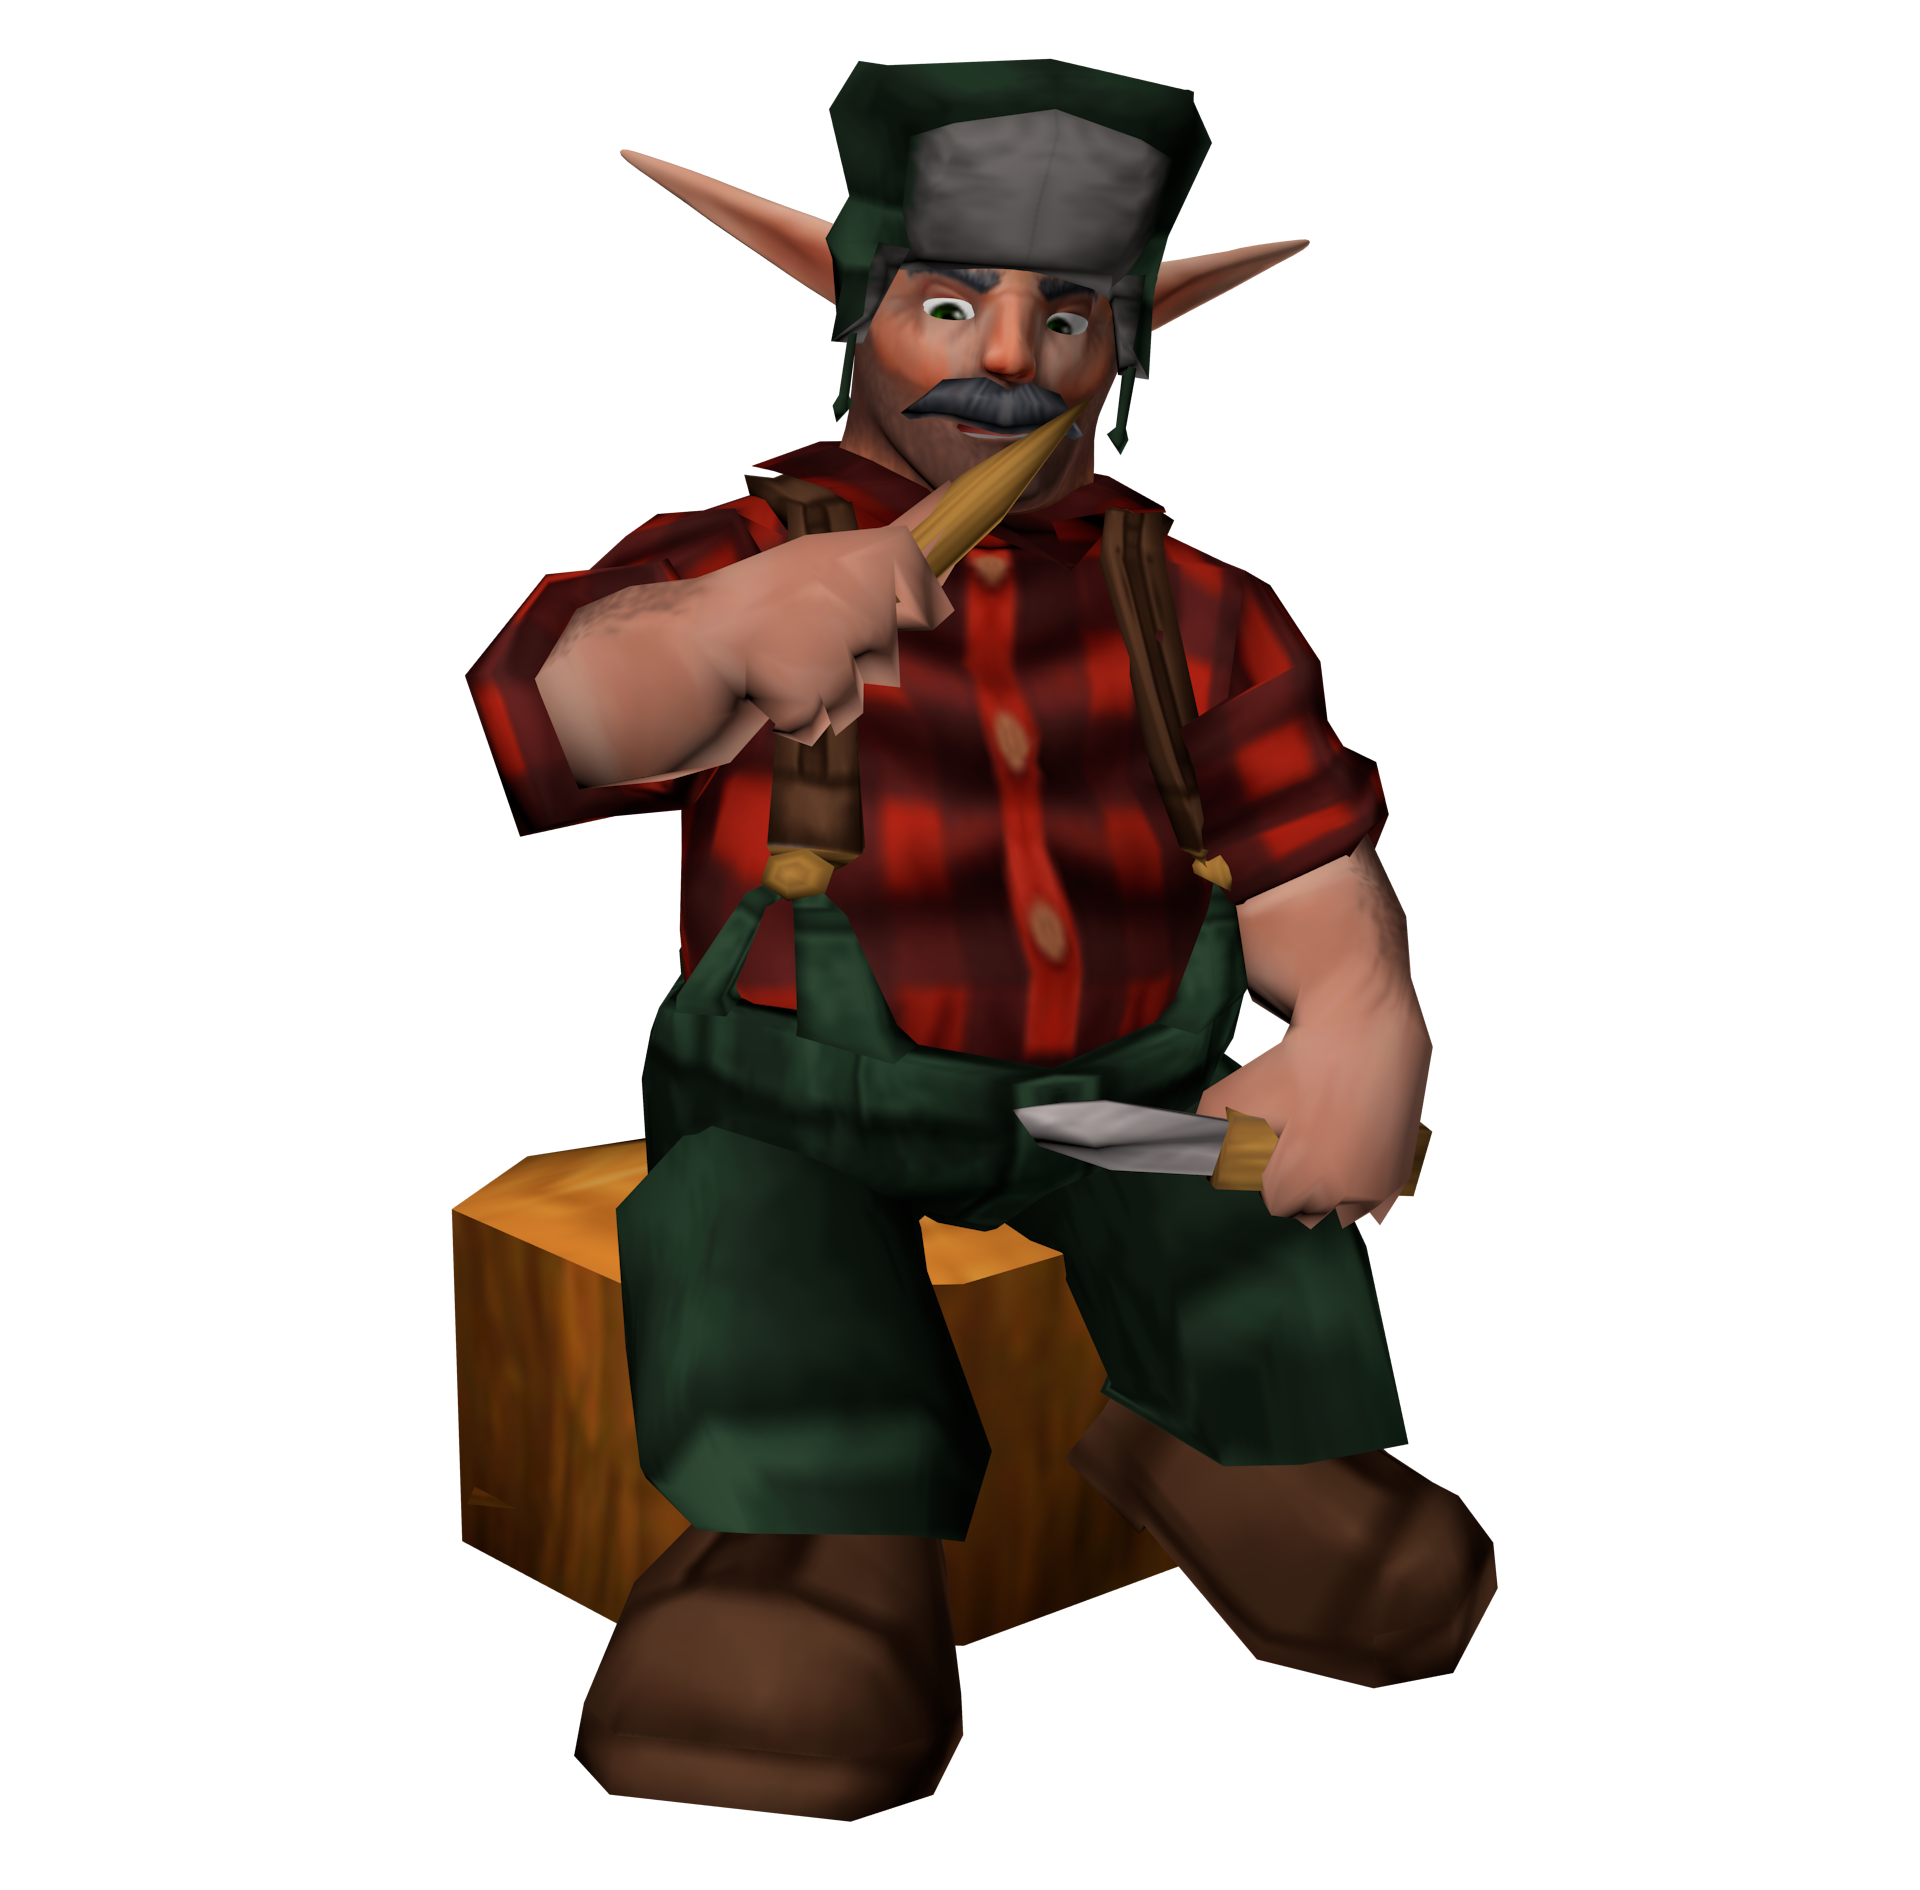 Lenny jak and daxter. Lumberjack clipart character